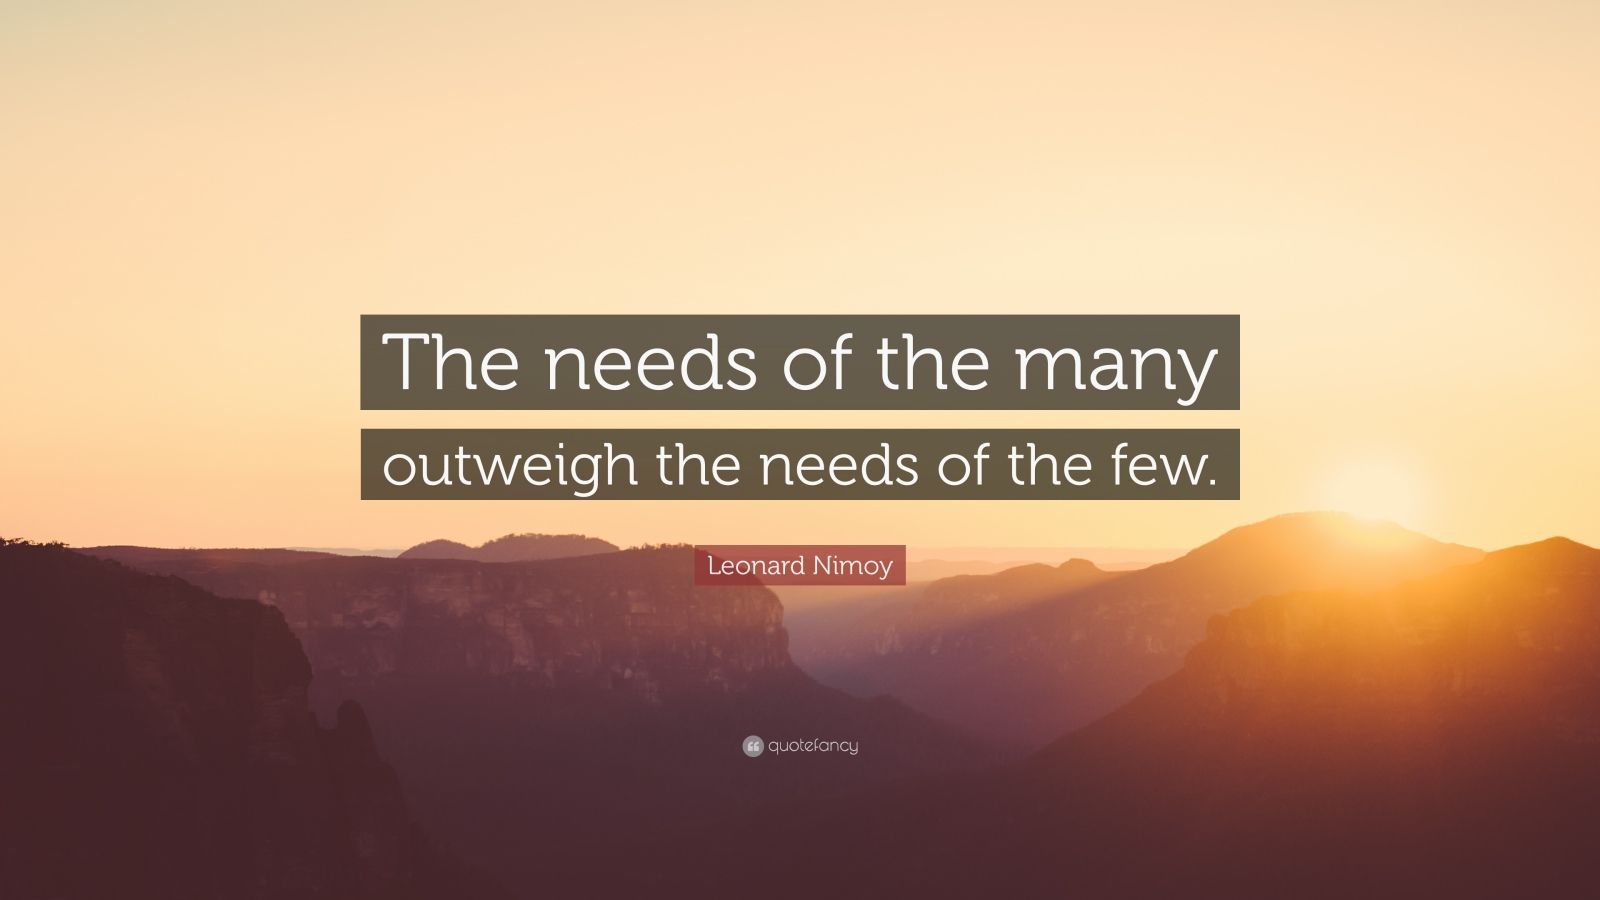 needs of the many outweigh the needs of the few